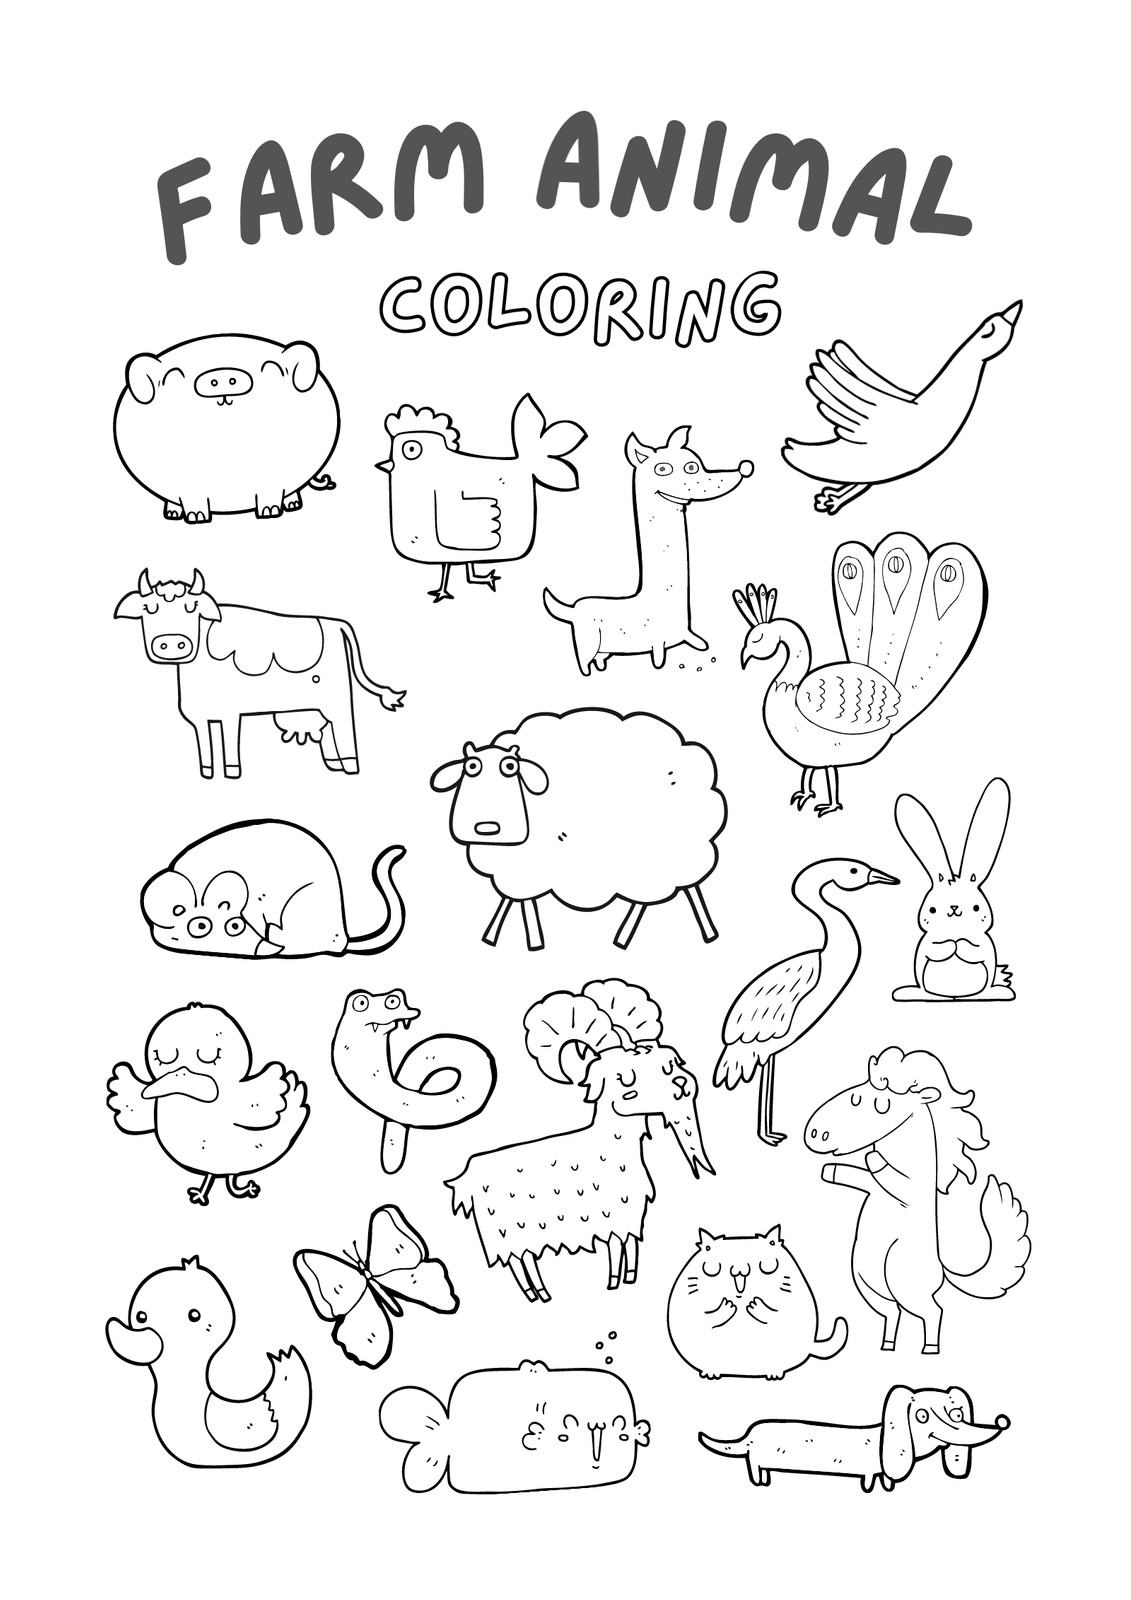 Page 4 - Free and customizable coloring templates